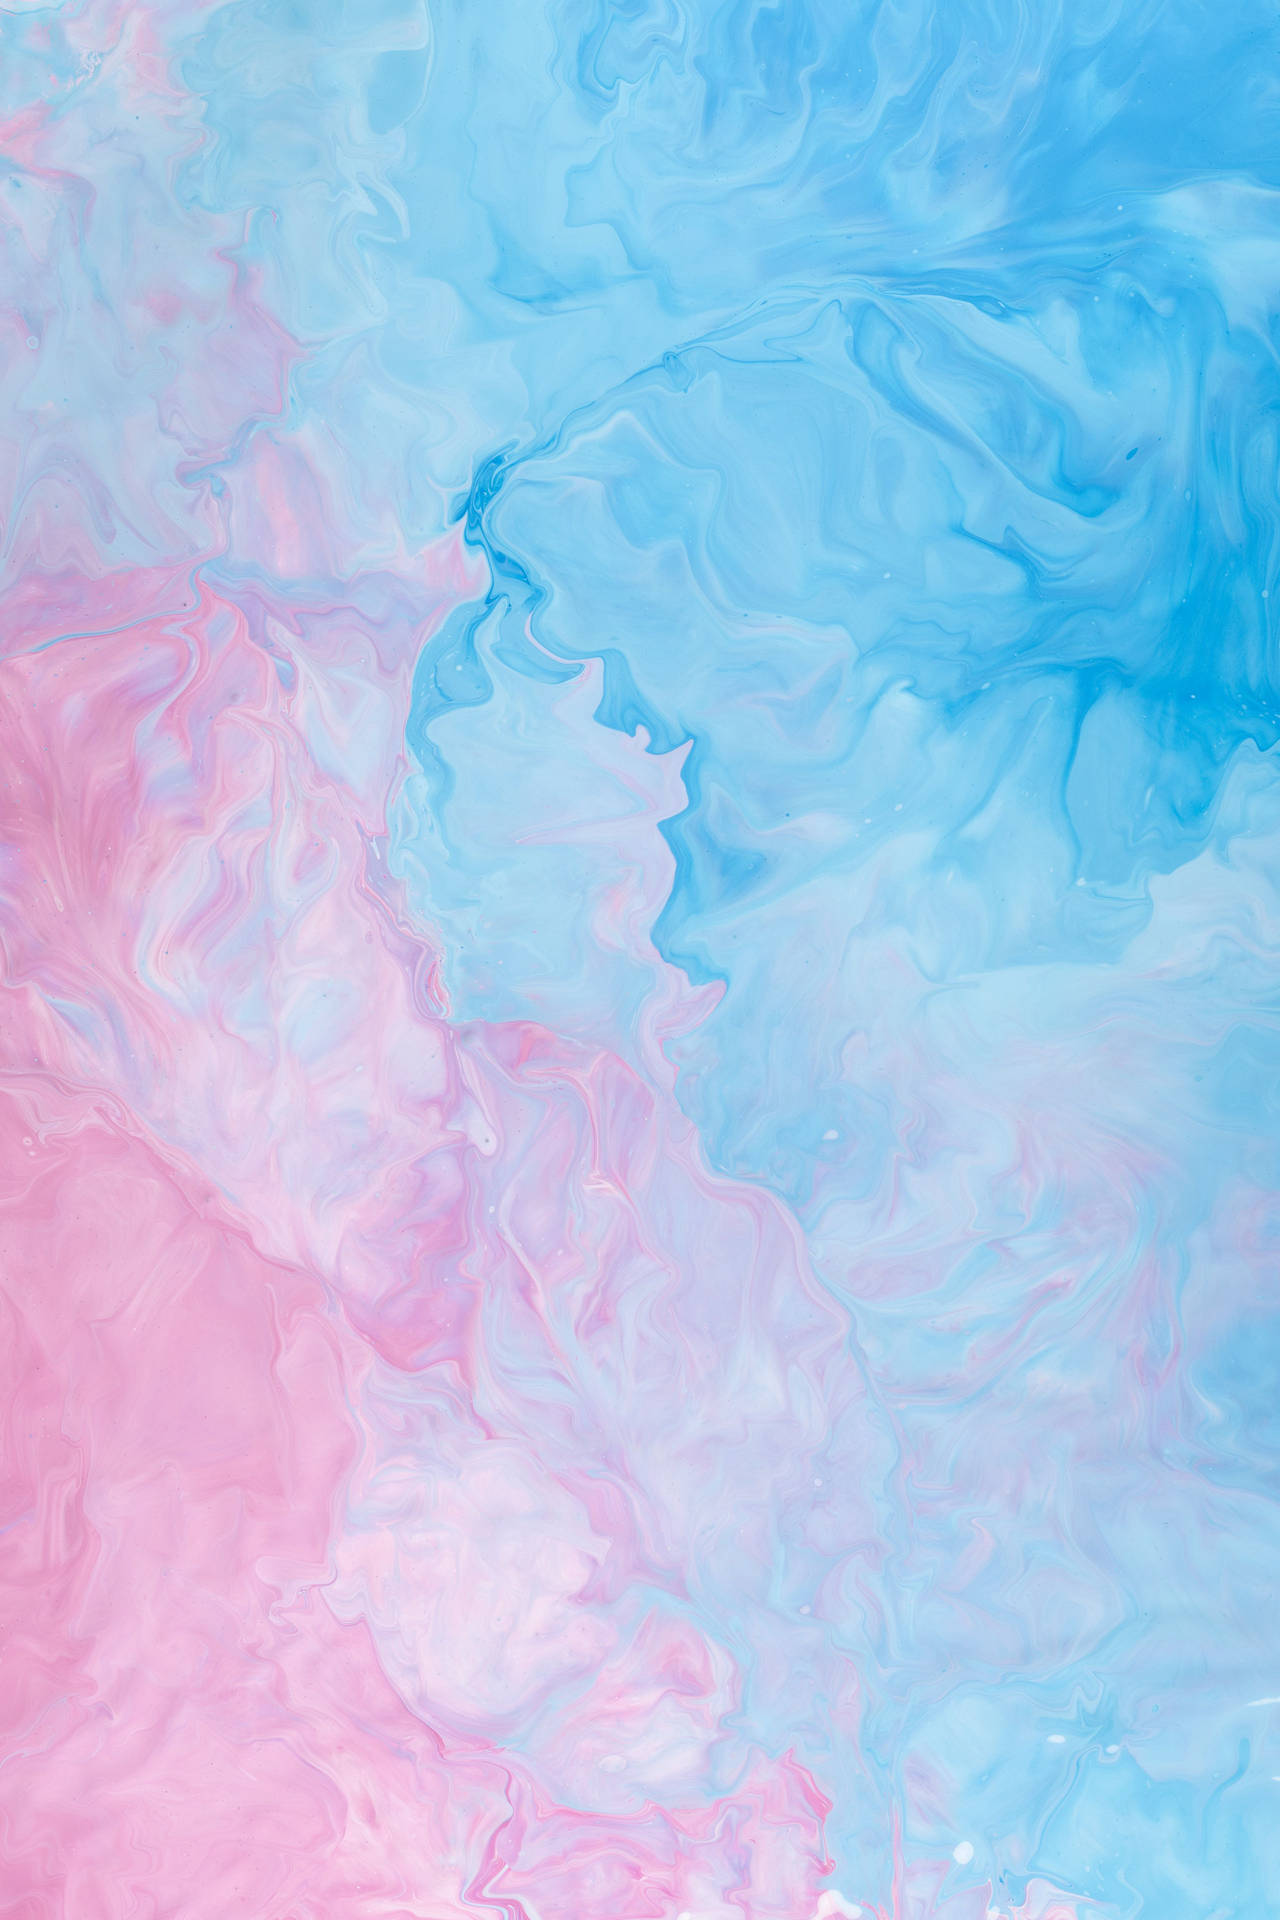 Aesthetic Fluid Wallpaper With A Blend Of Pastel And Green Colors  Background, Fluid, Wallpaper, Pastel Background Image And Wallpaper for  Free Download